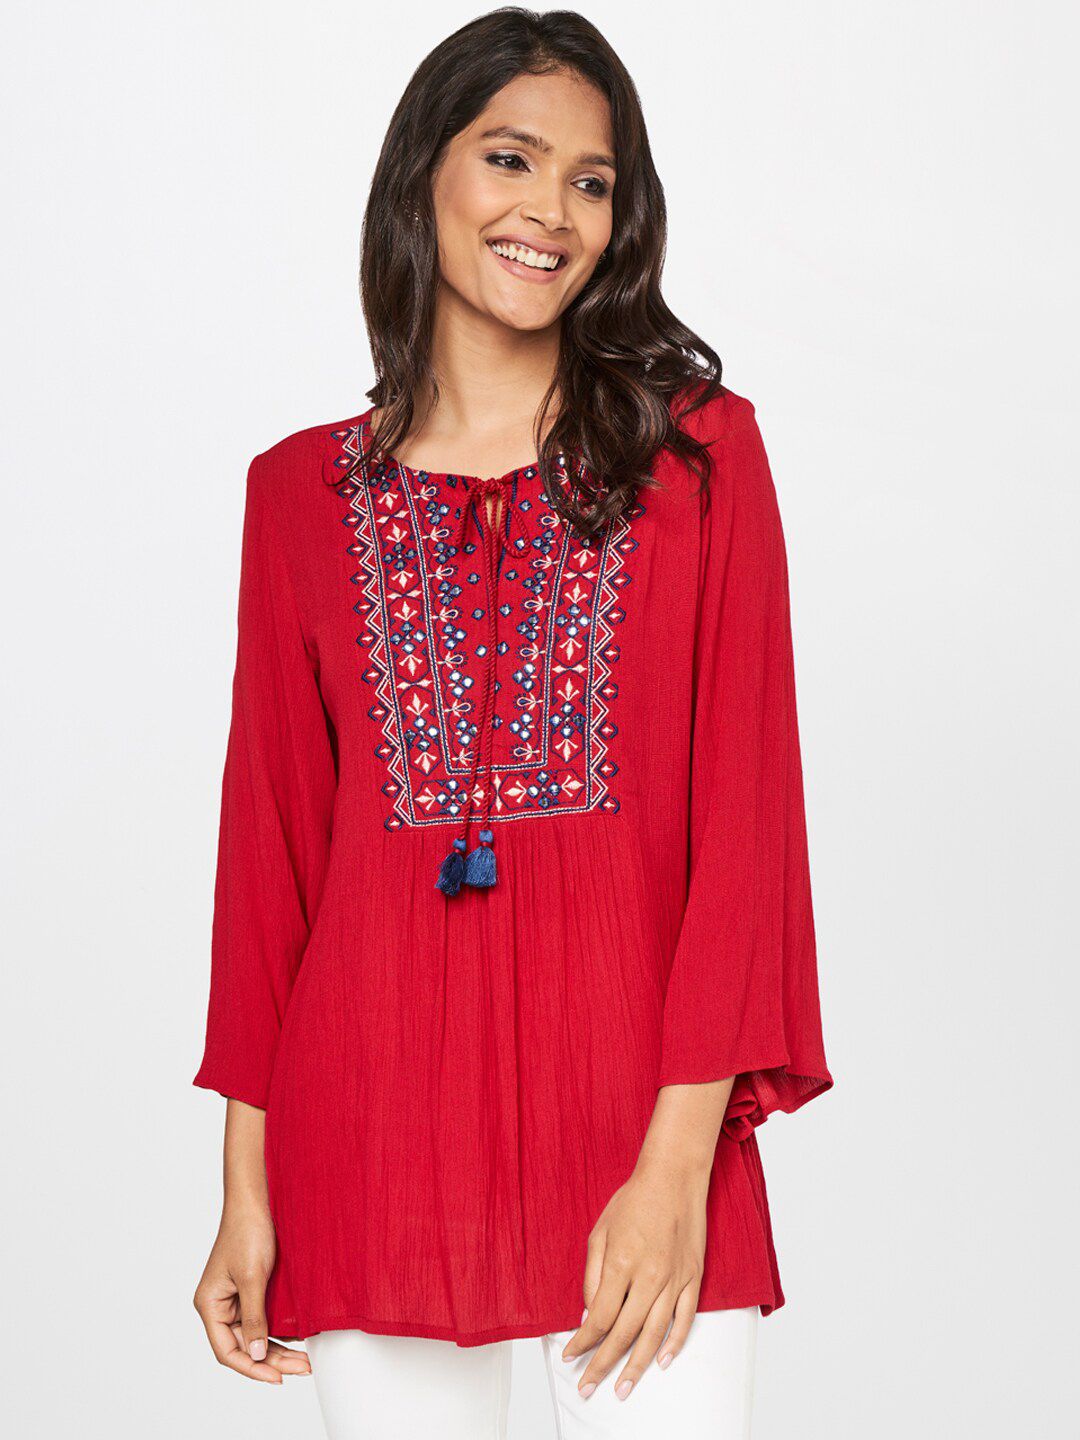 itse Red Embellished Tie-Up Neck Top Price in India